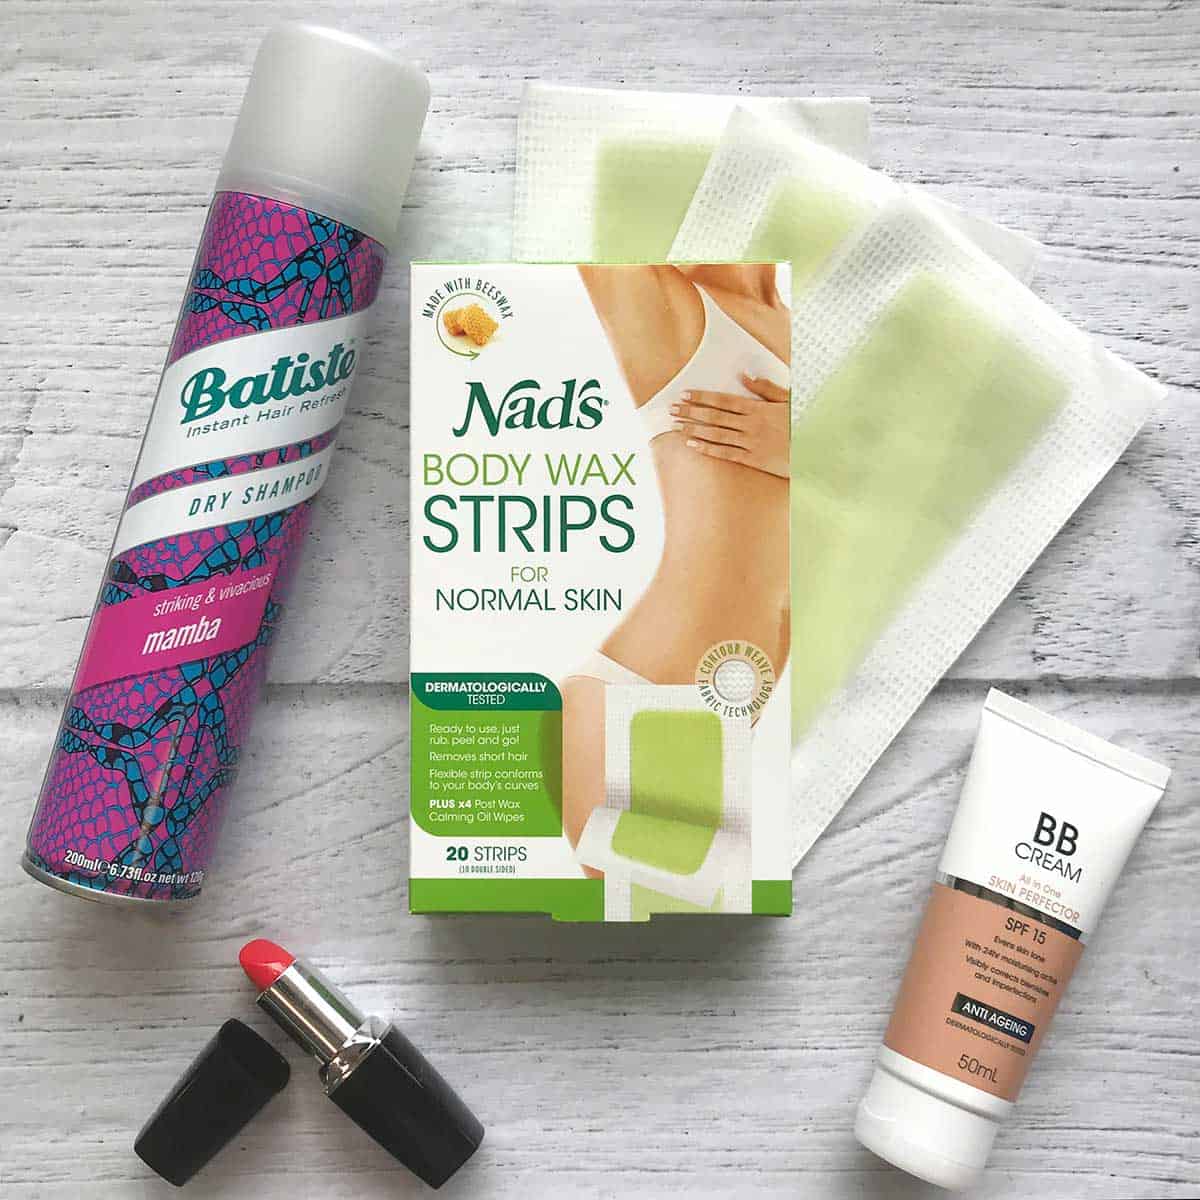 Nad's Top 5 Tips to get ready in 5 minutes | Nad's Hair Removal Blog